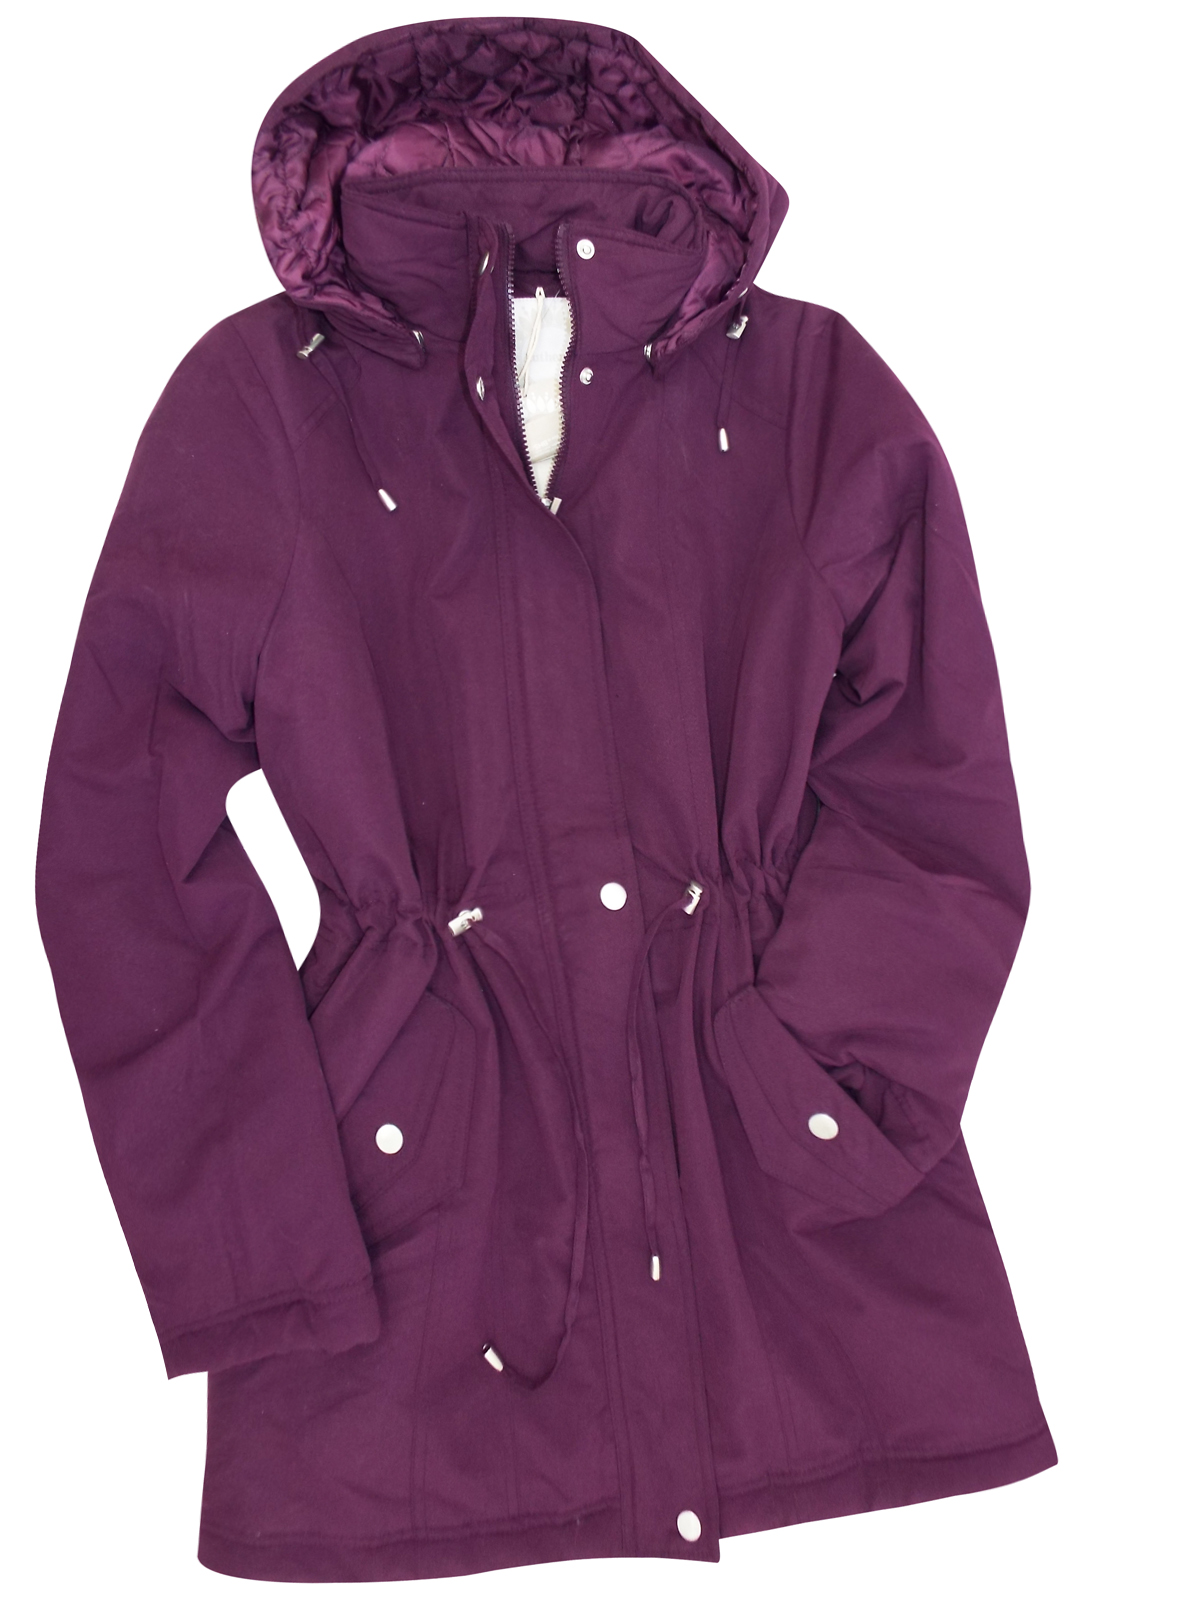 BHS - - BH5 PURPLE Casual Coat with Detachable Hood - Size 8